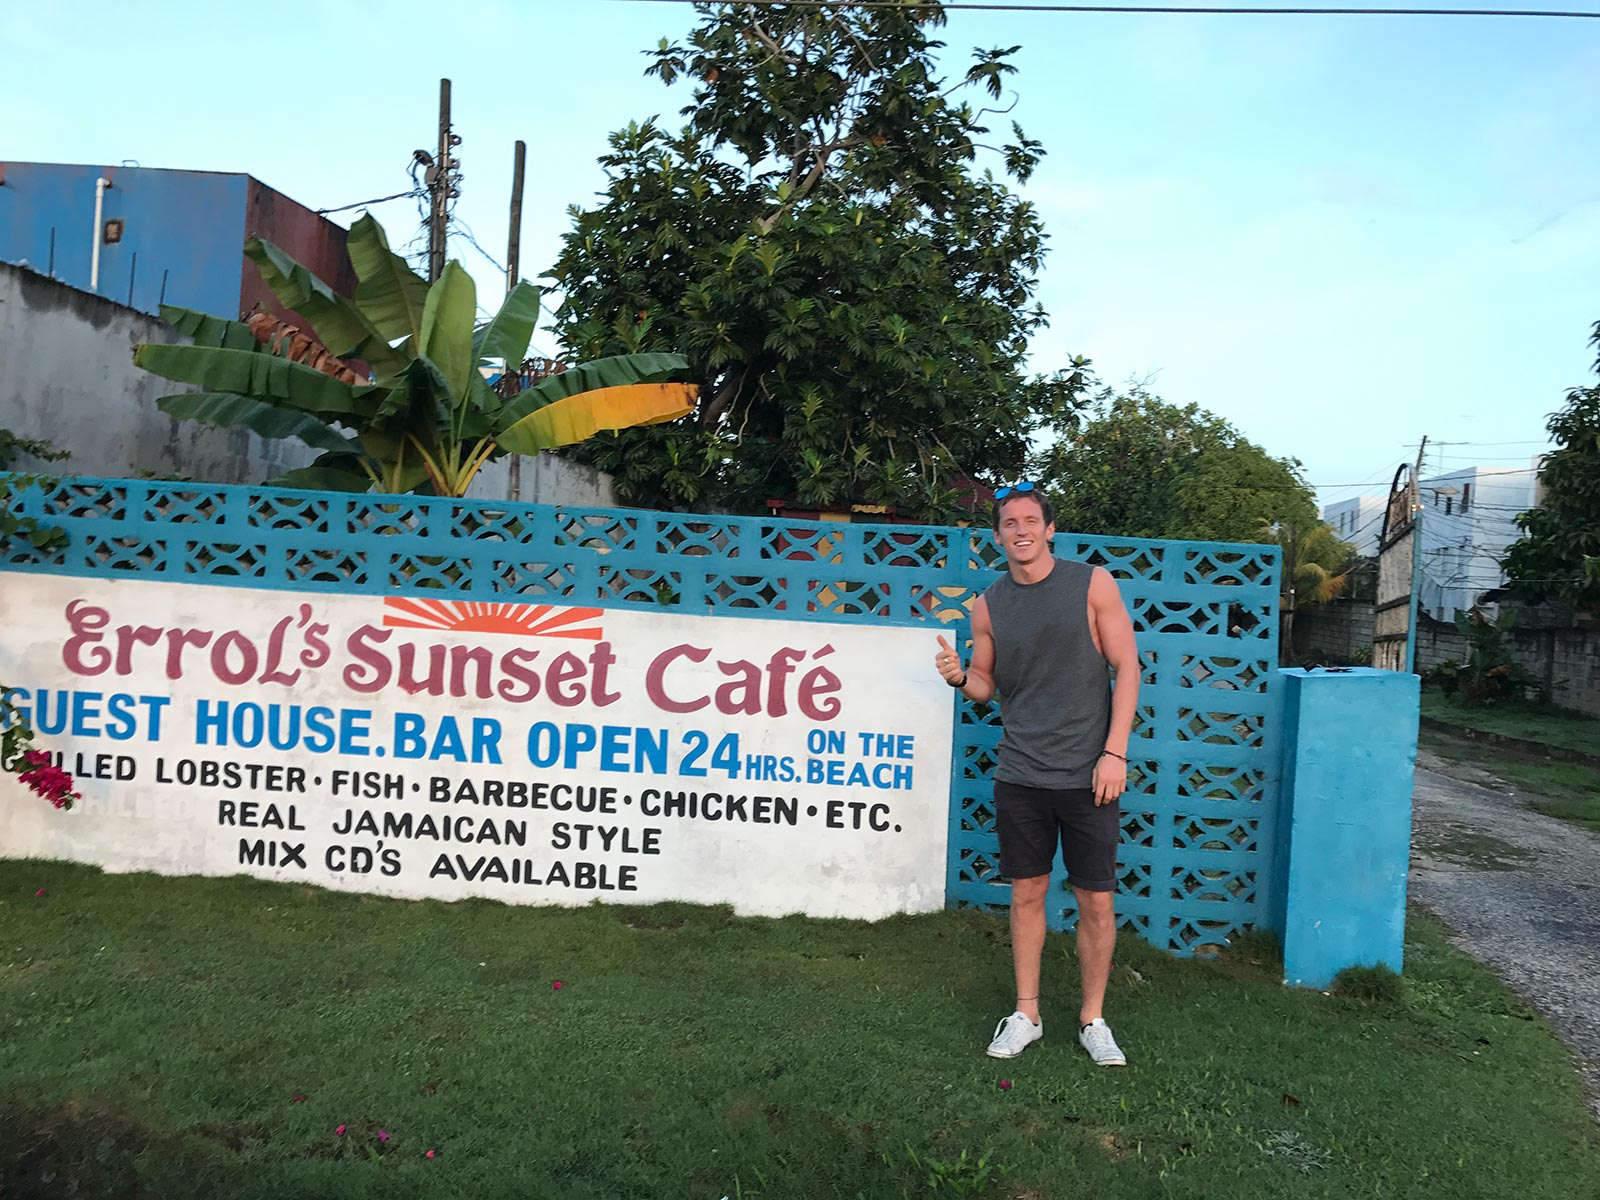 David Simpson standing near signage in Negril, Jamaica. Getting chased in Jamaica